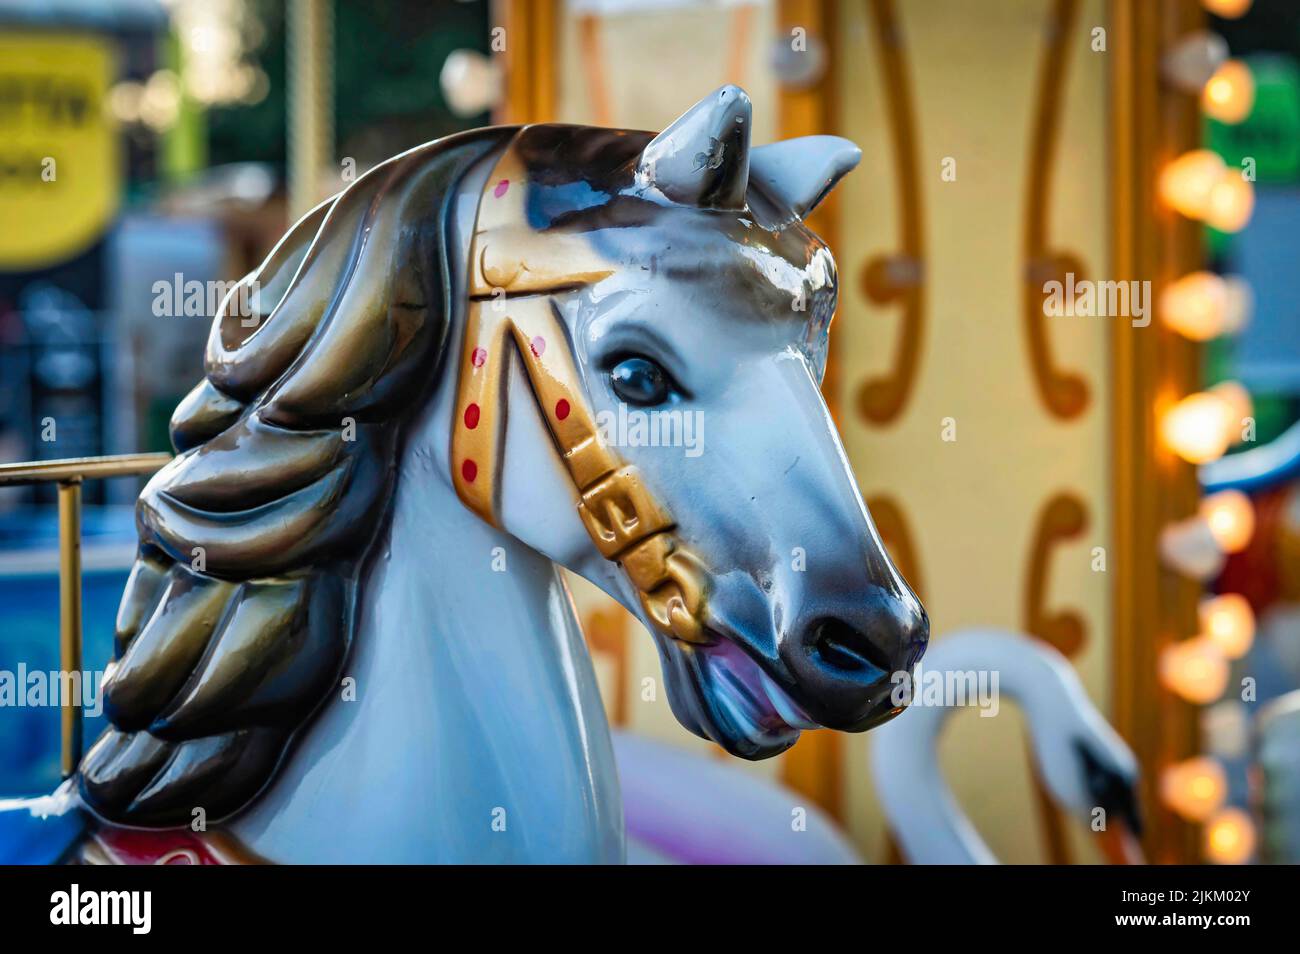 A merry - go - round horse at the fairground .The old carousel in the park of culture and recreation. Stock Photo